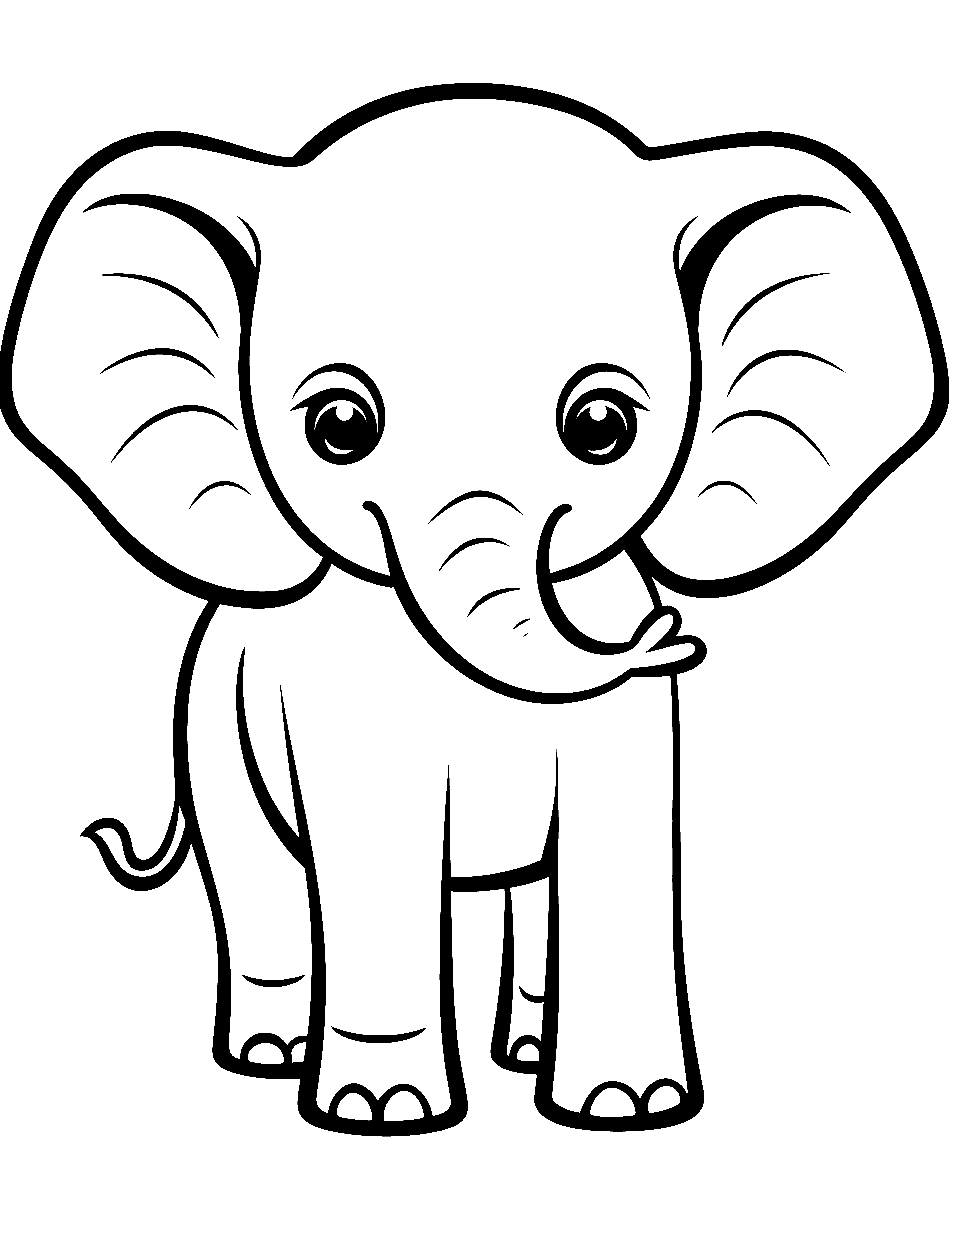 Elephant Drawing Colour Images - Free Download on Freepik